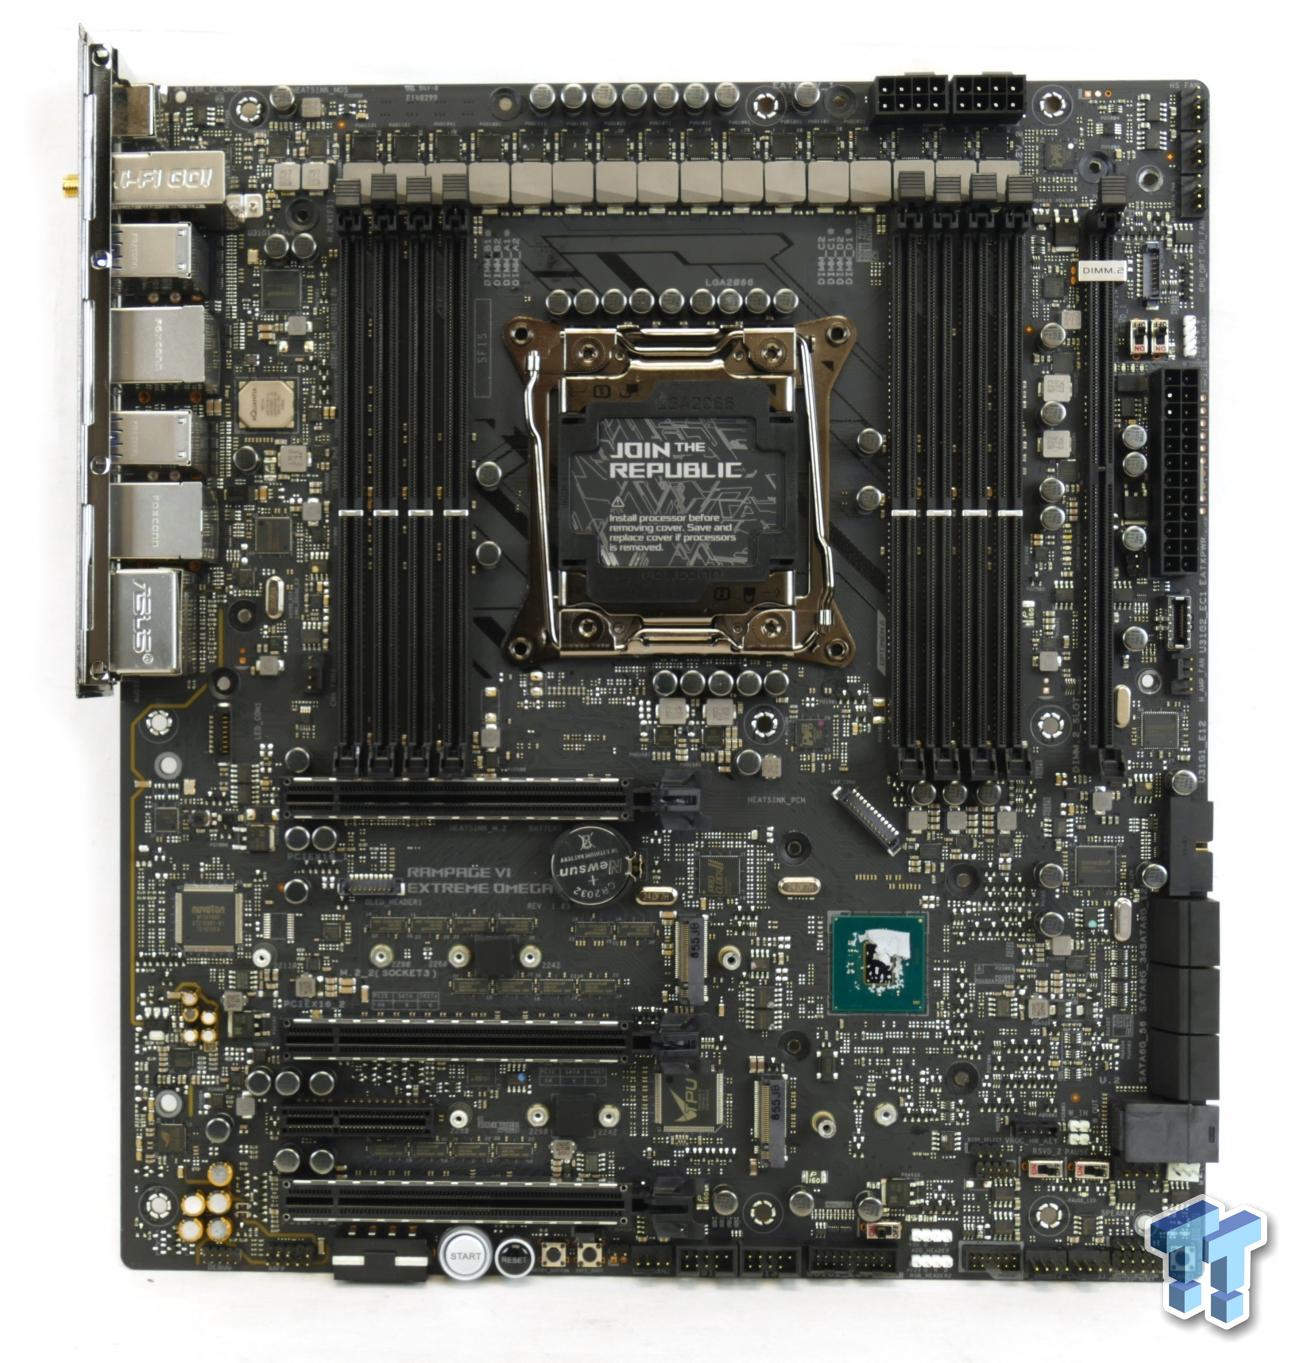 ASUS Rampage Extreme Omega Review